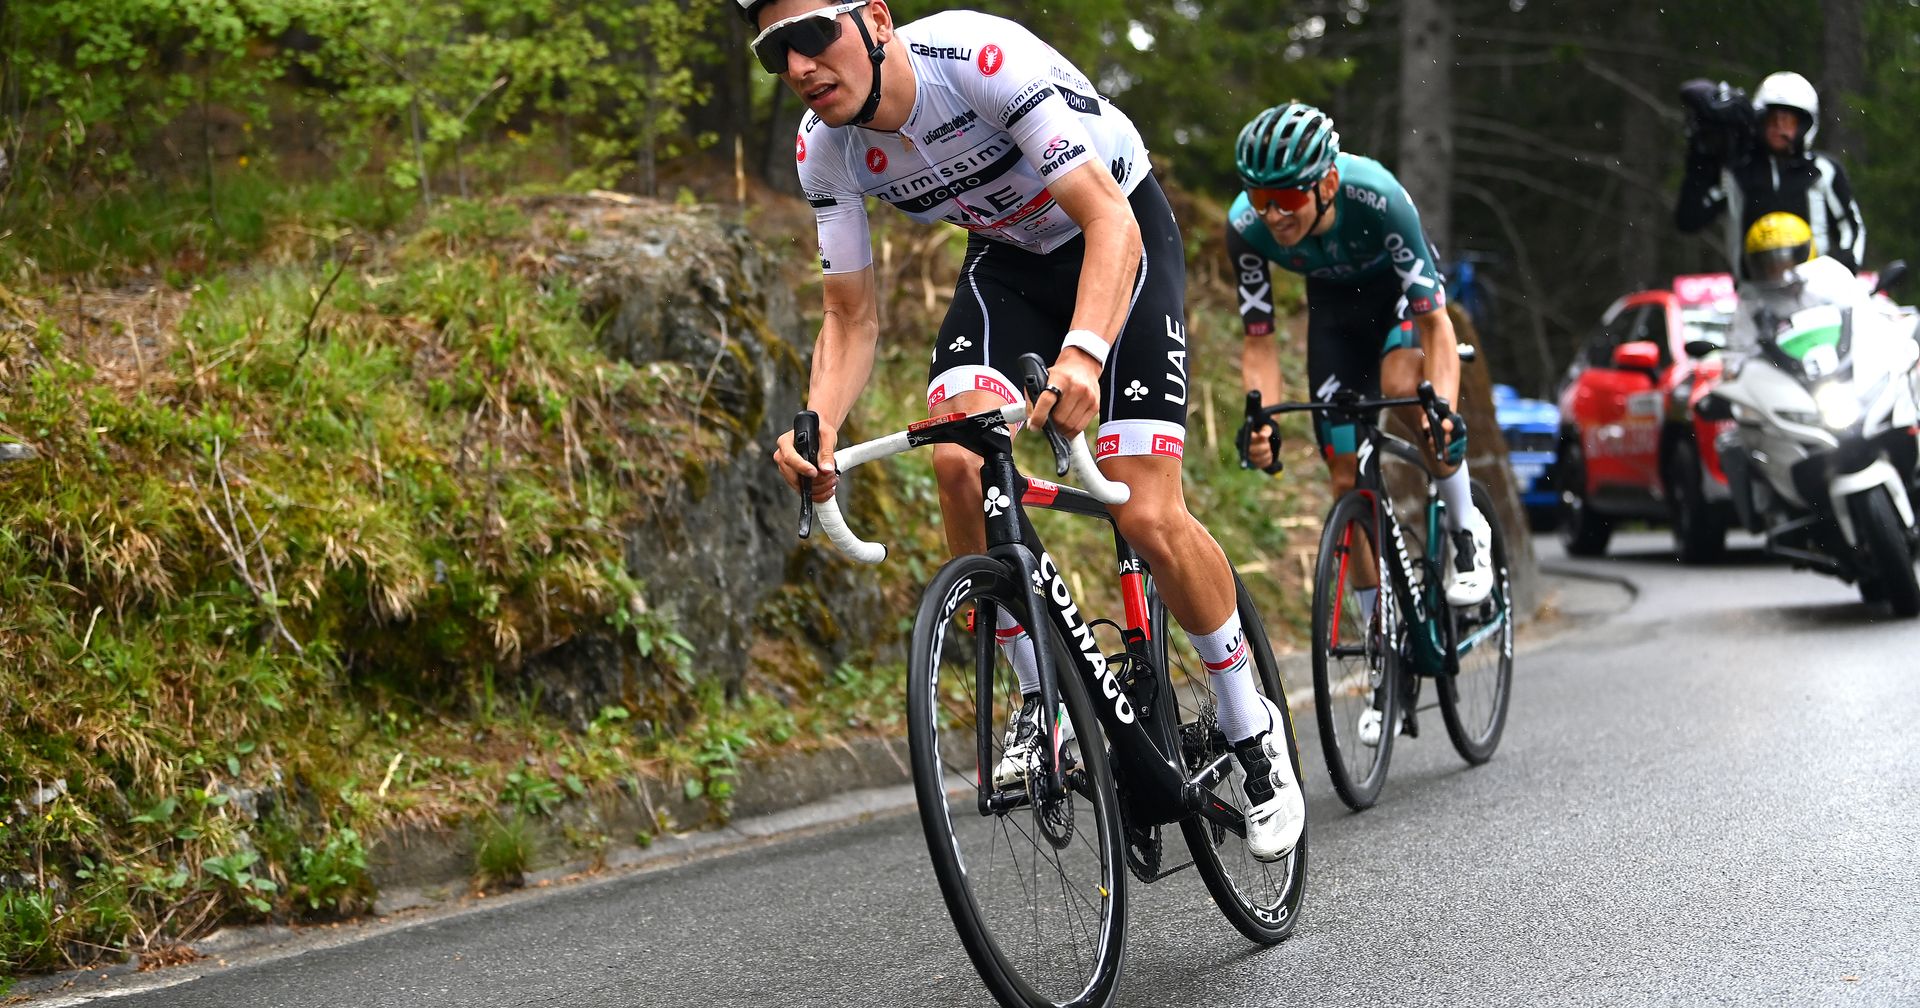 Joao Almeida's defense counters Landismo's size as the Portuguese retains 3rd place in the Giro